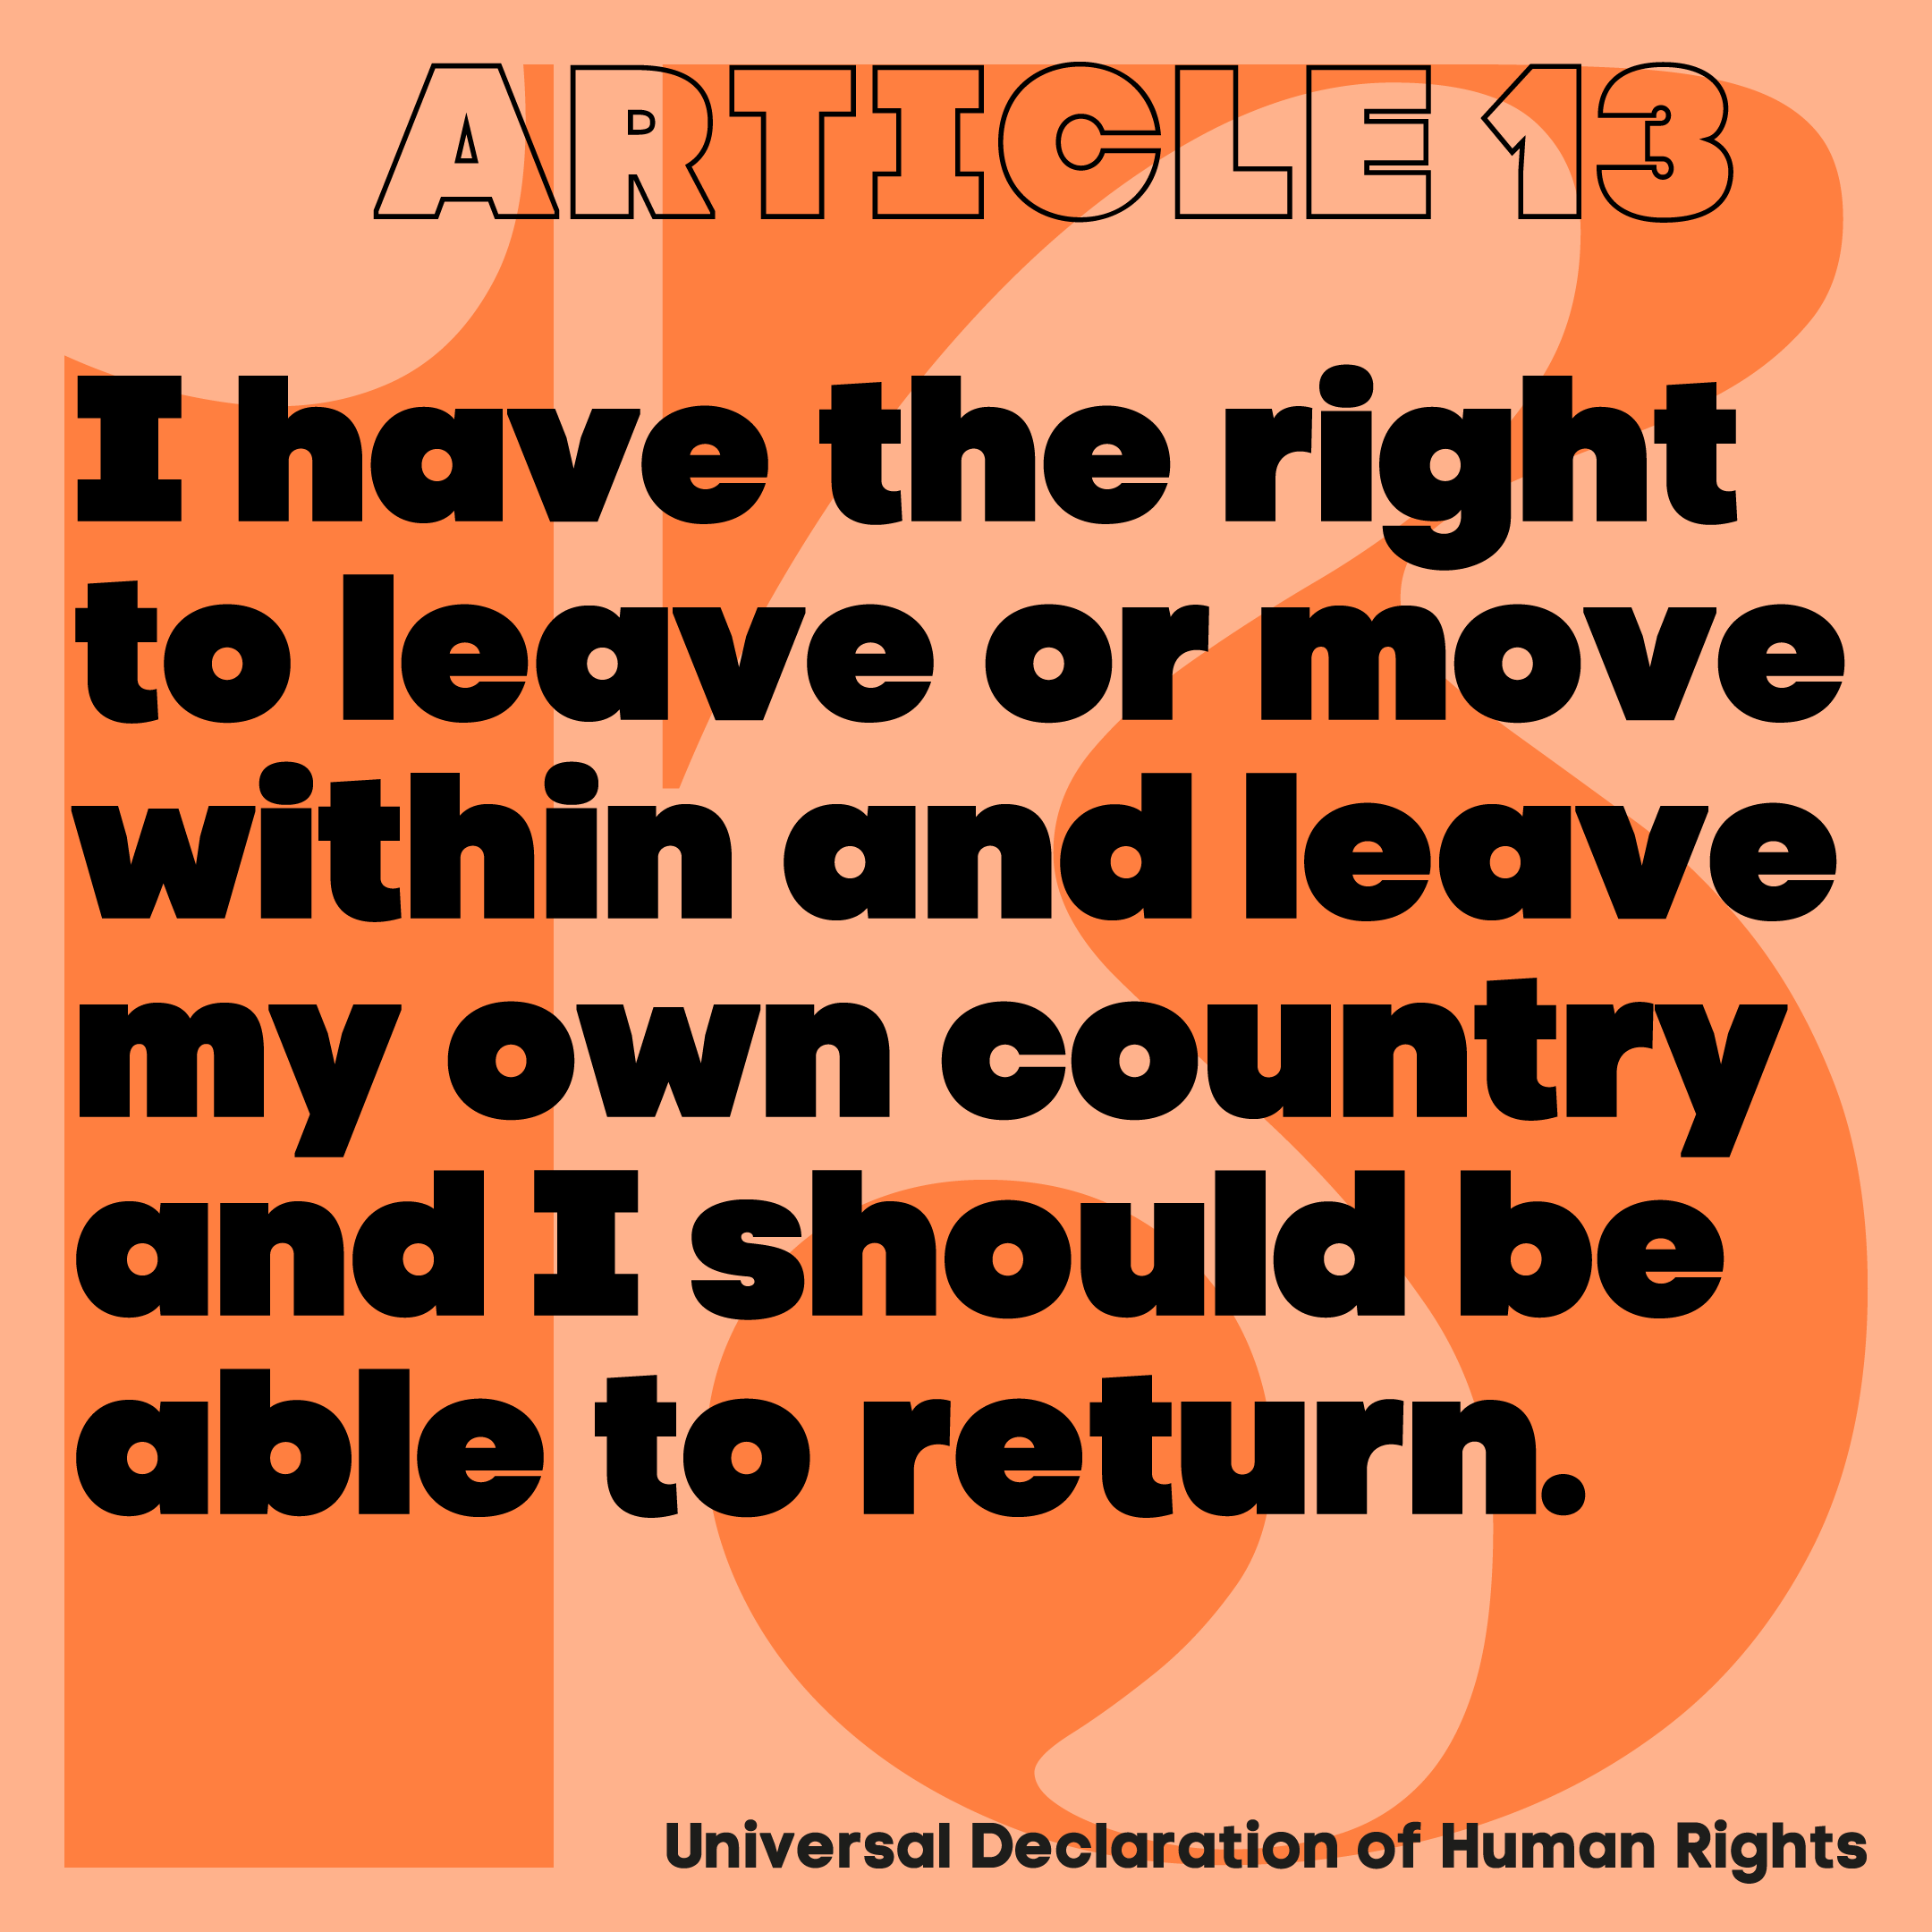 Article 13. I have the right to leave or move within and leave my own country and I should be able to return.